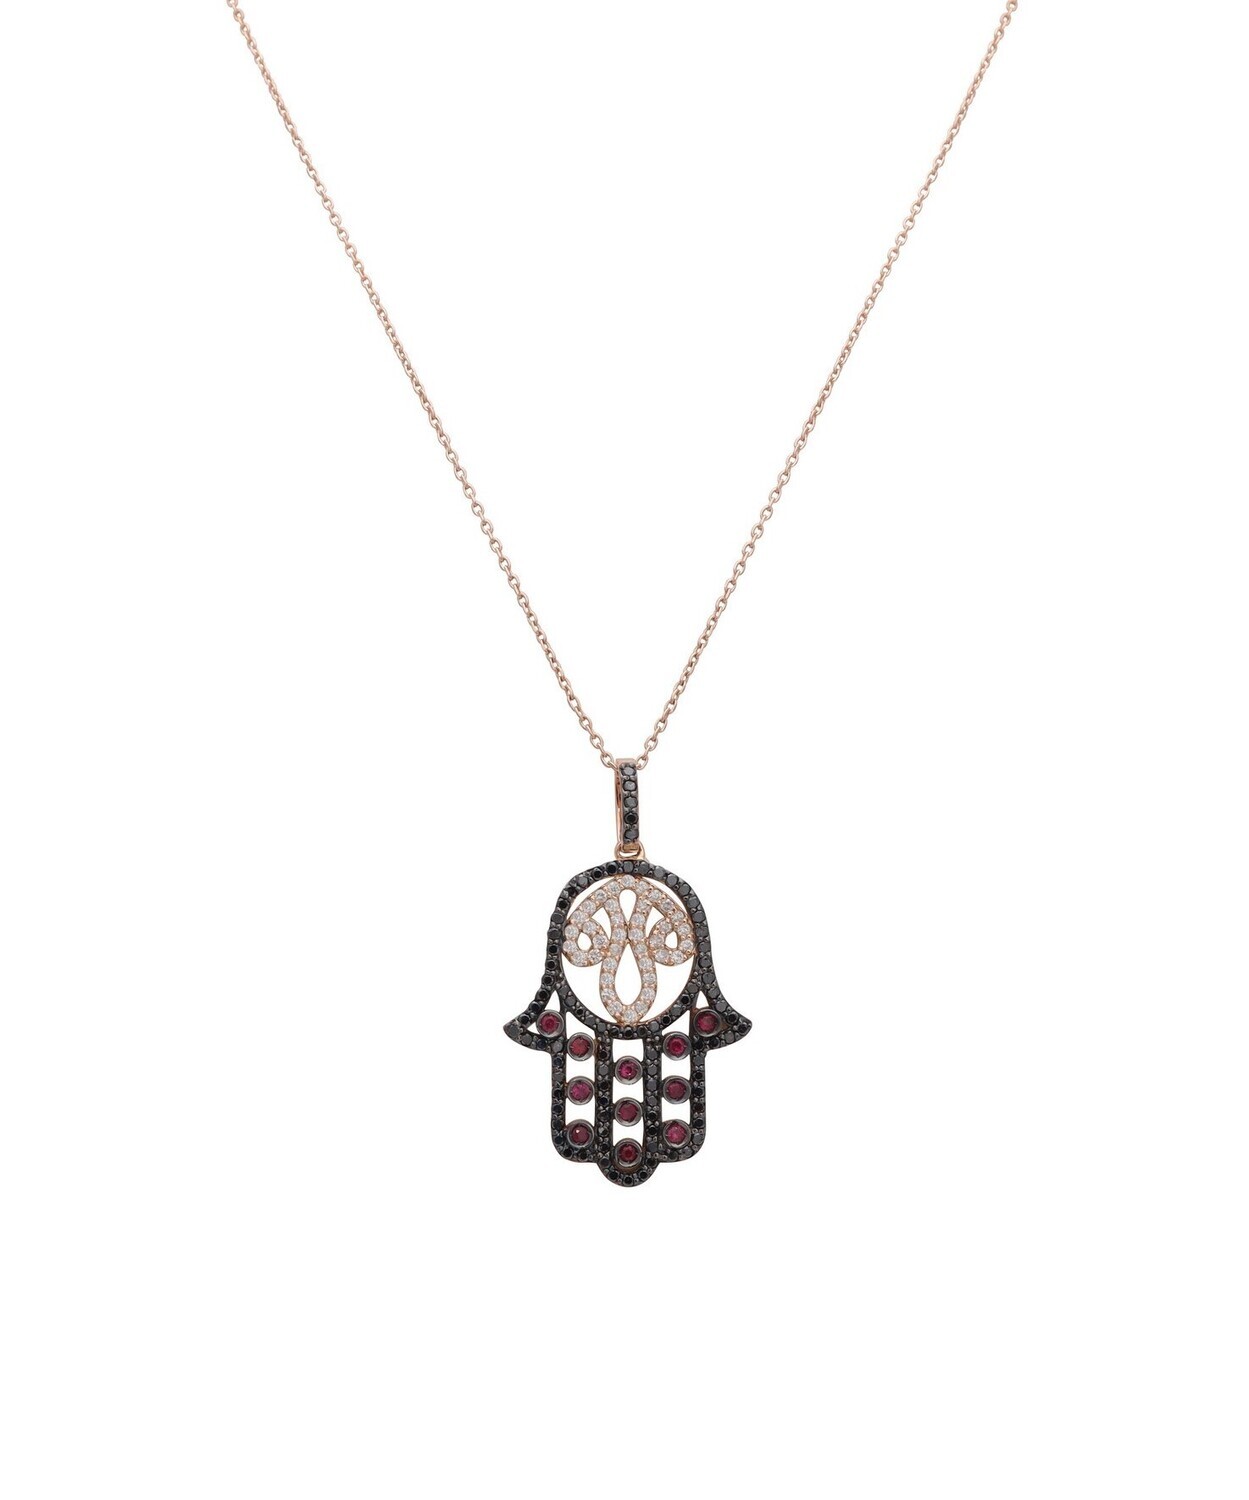 Eternal Hand of Fatima Diamond Necklace with Ruby and Black Diamond